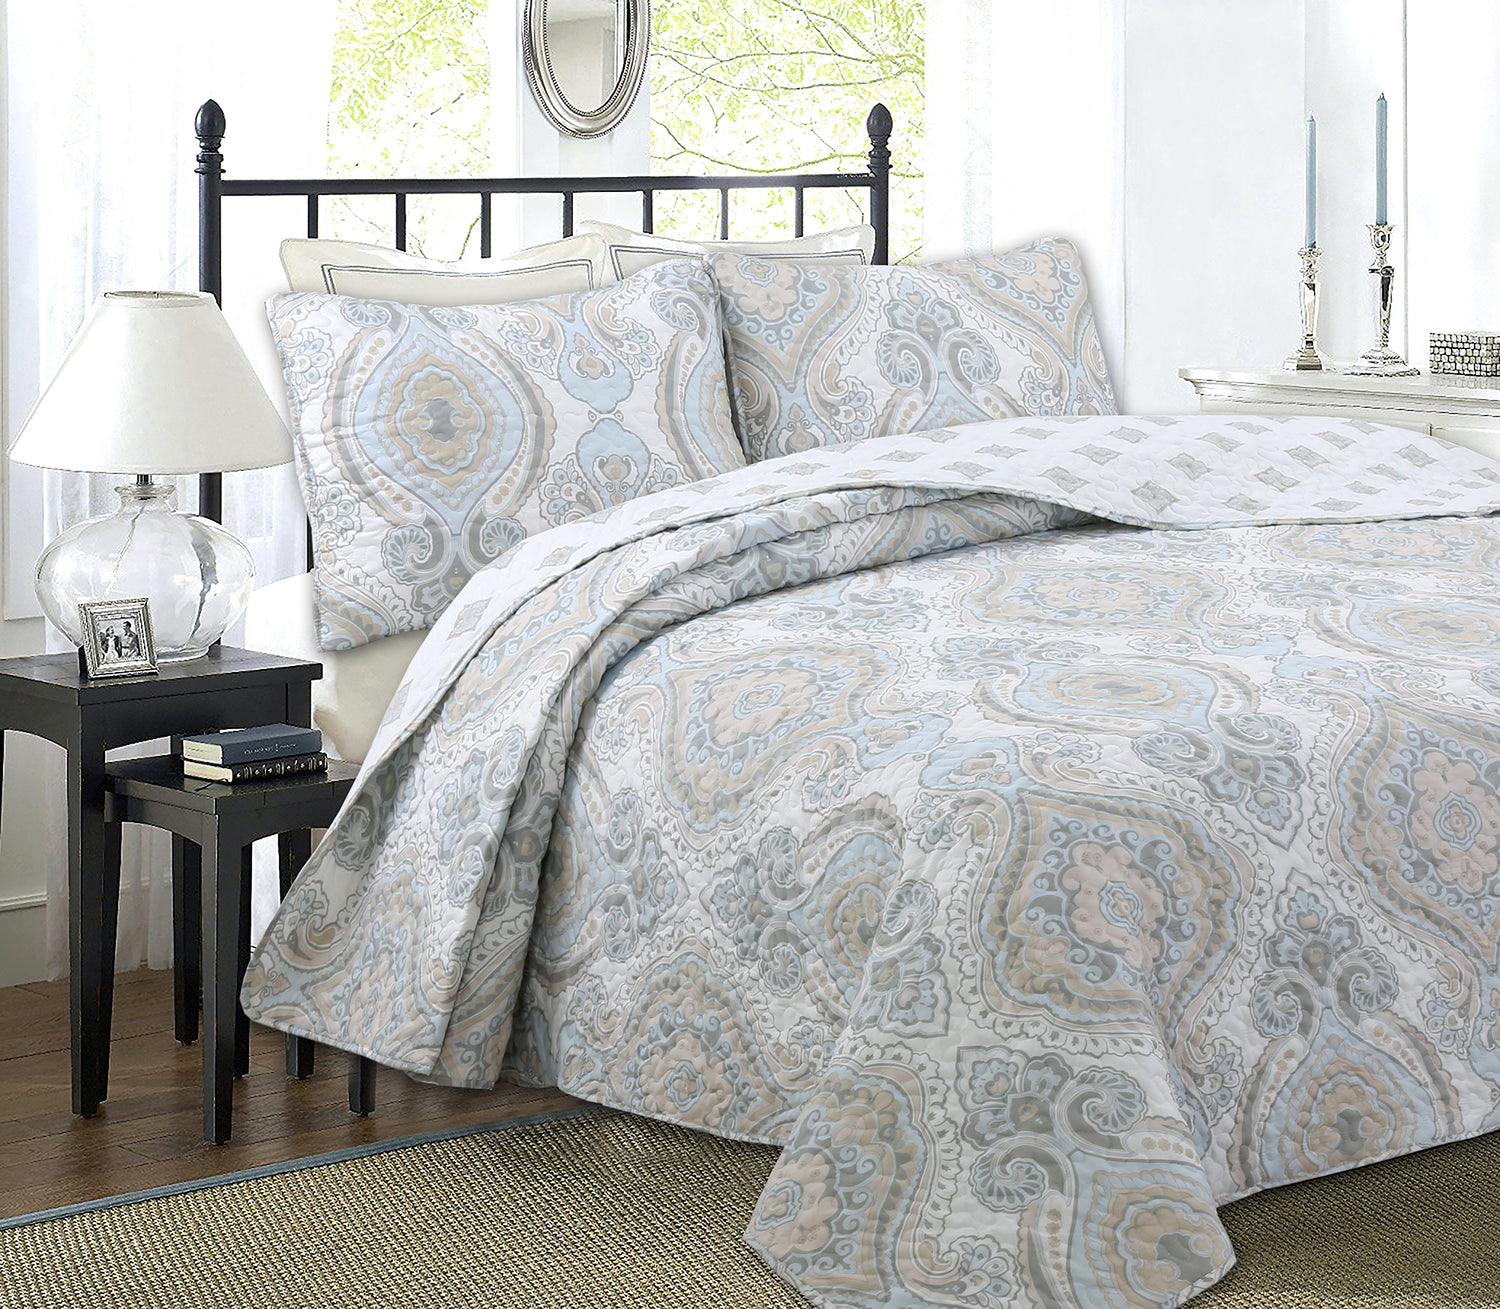 Cozy Line Home Fashions: Quilt Set, Baby Bedding Set, Throws, Rugs ...